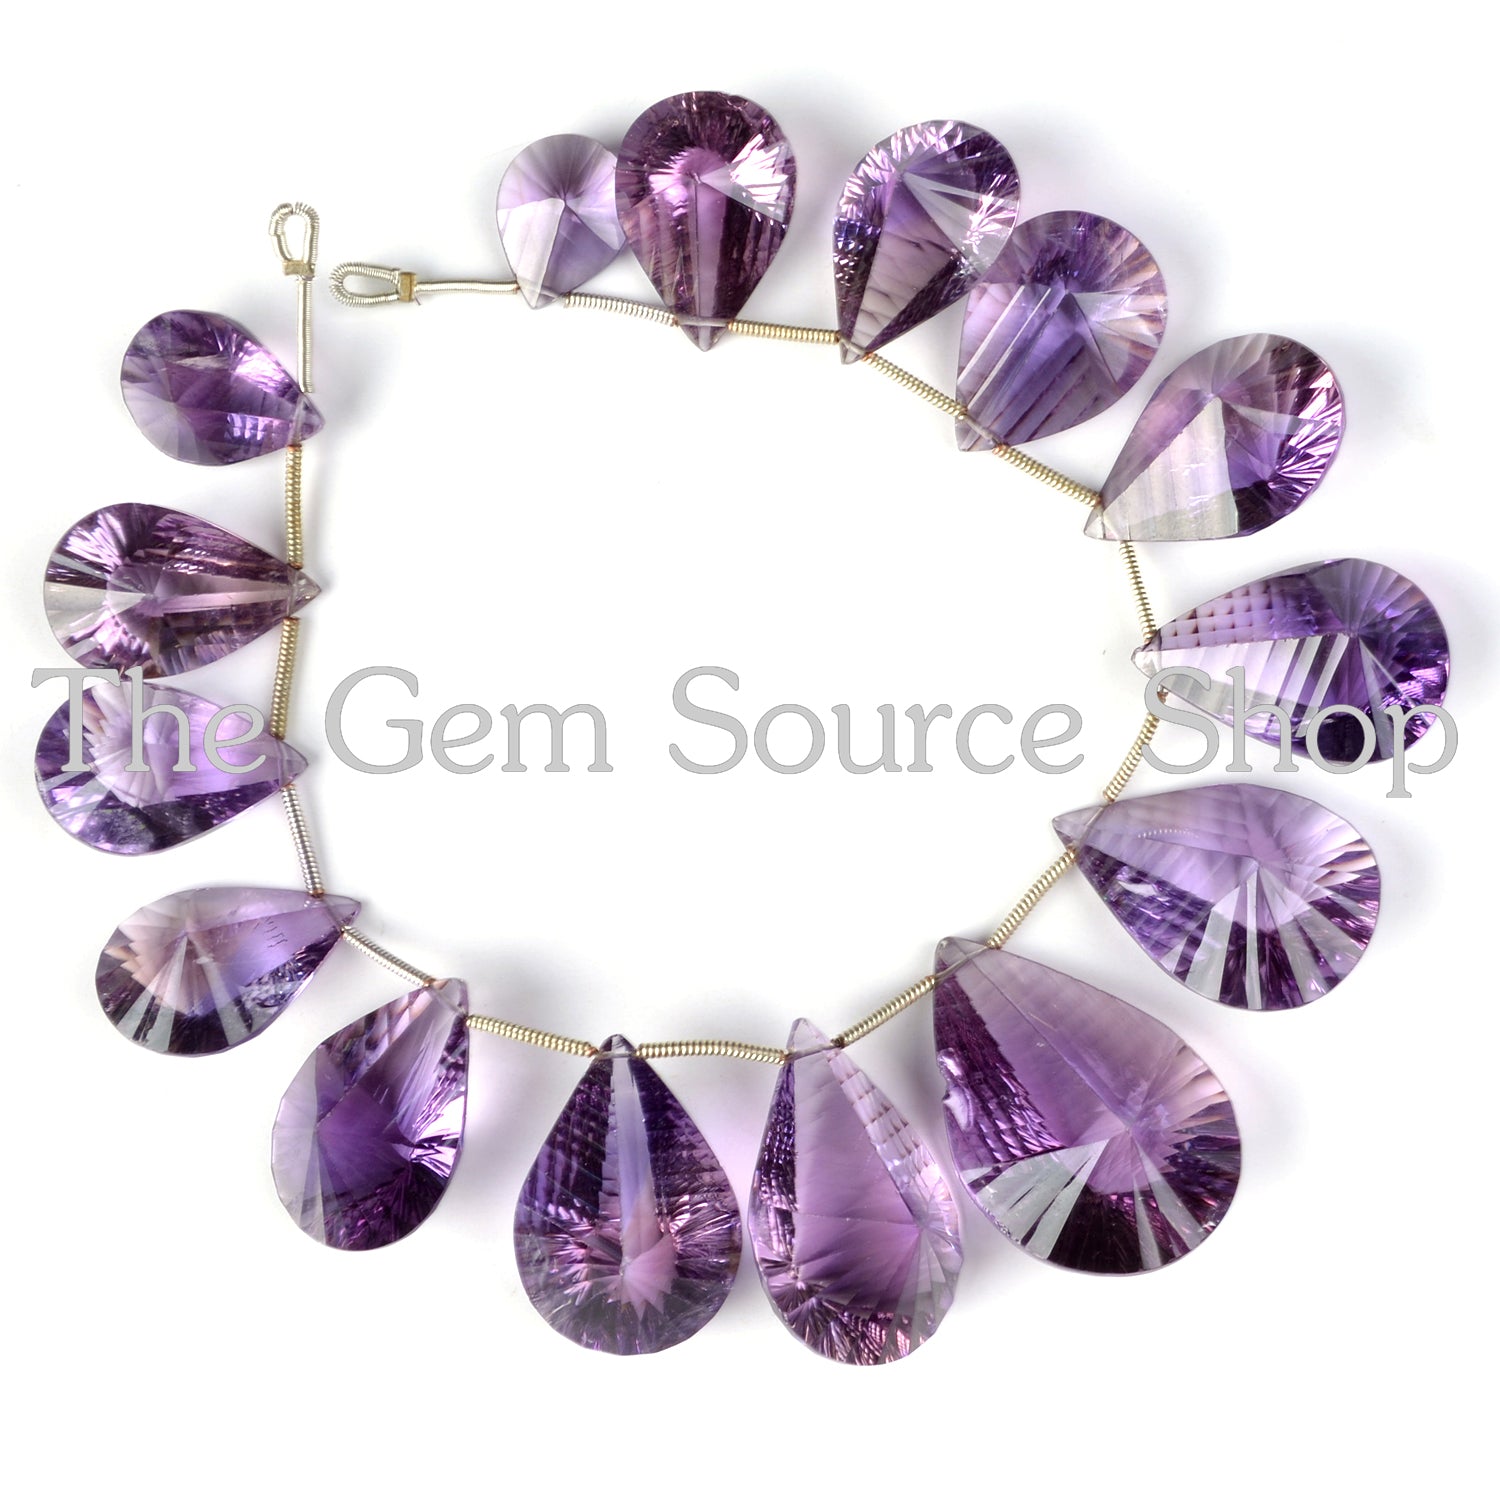 Shiny Amethyst Beads For Jewelry